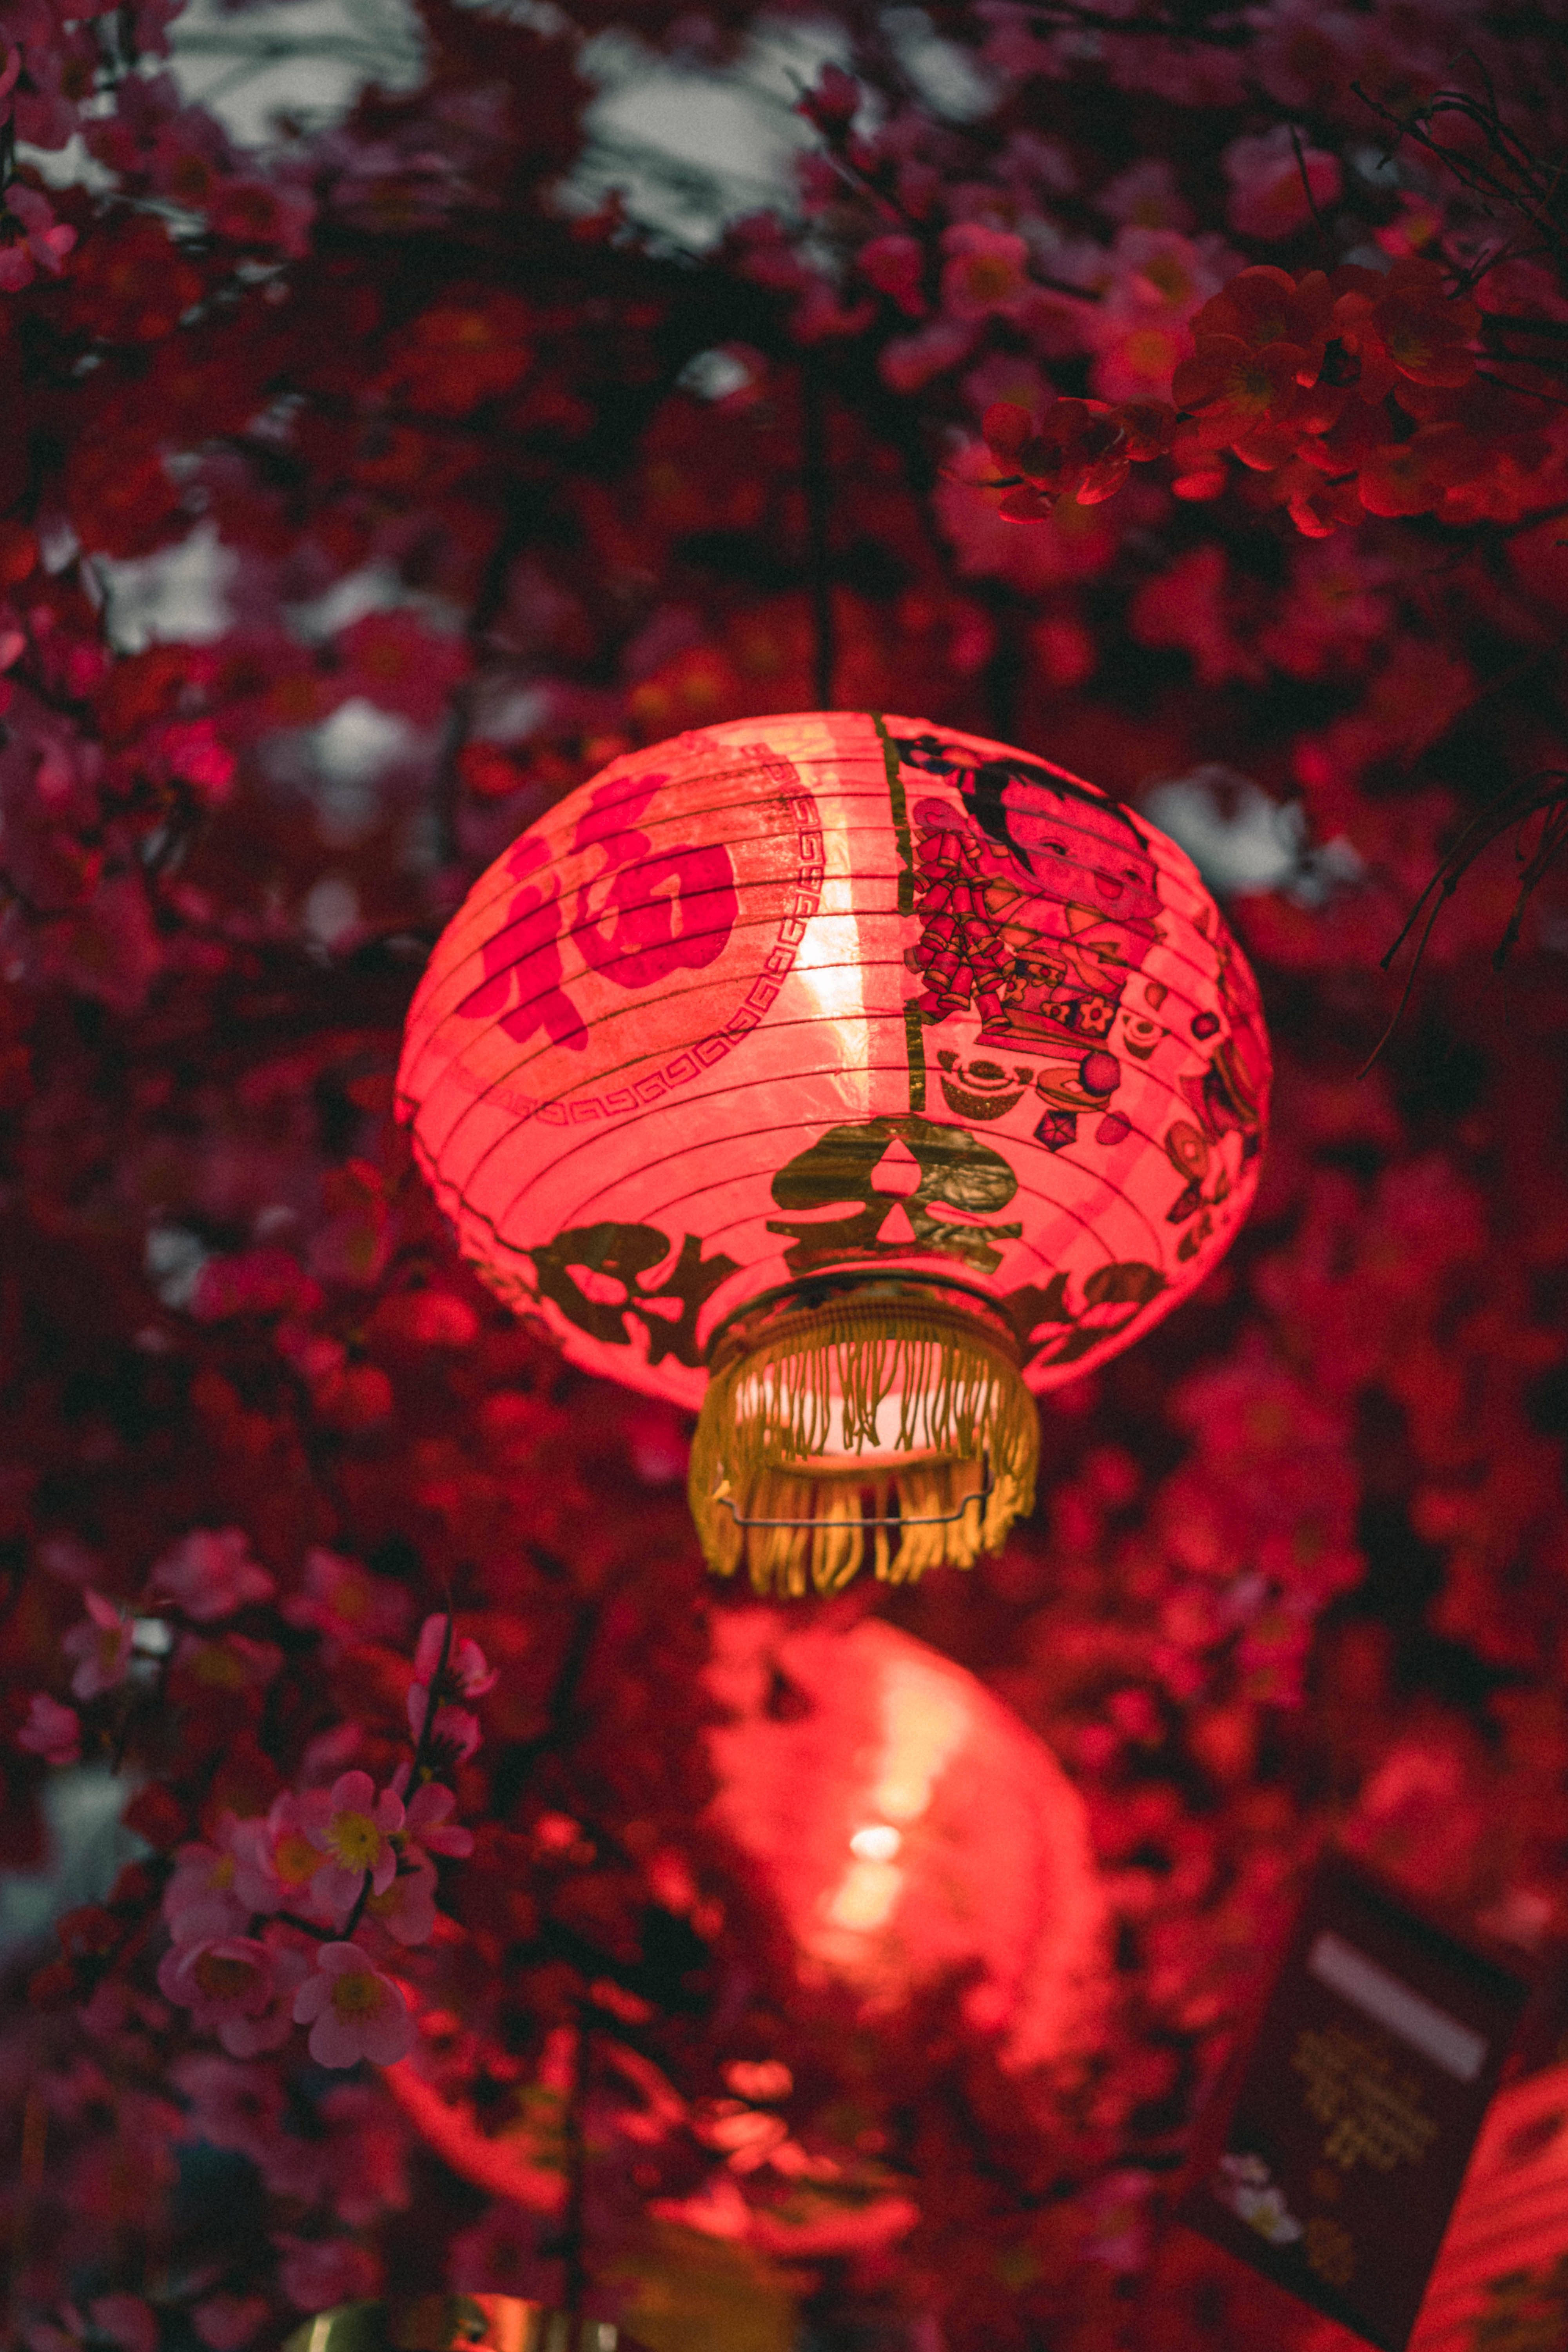 Captivating Mobile Screen Image With A Glowing Red Lantern Hanging On A Tree On Chinese New Year.